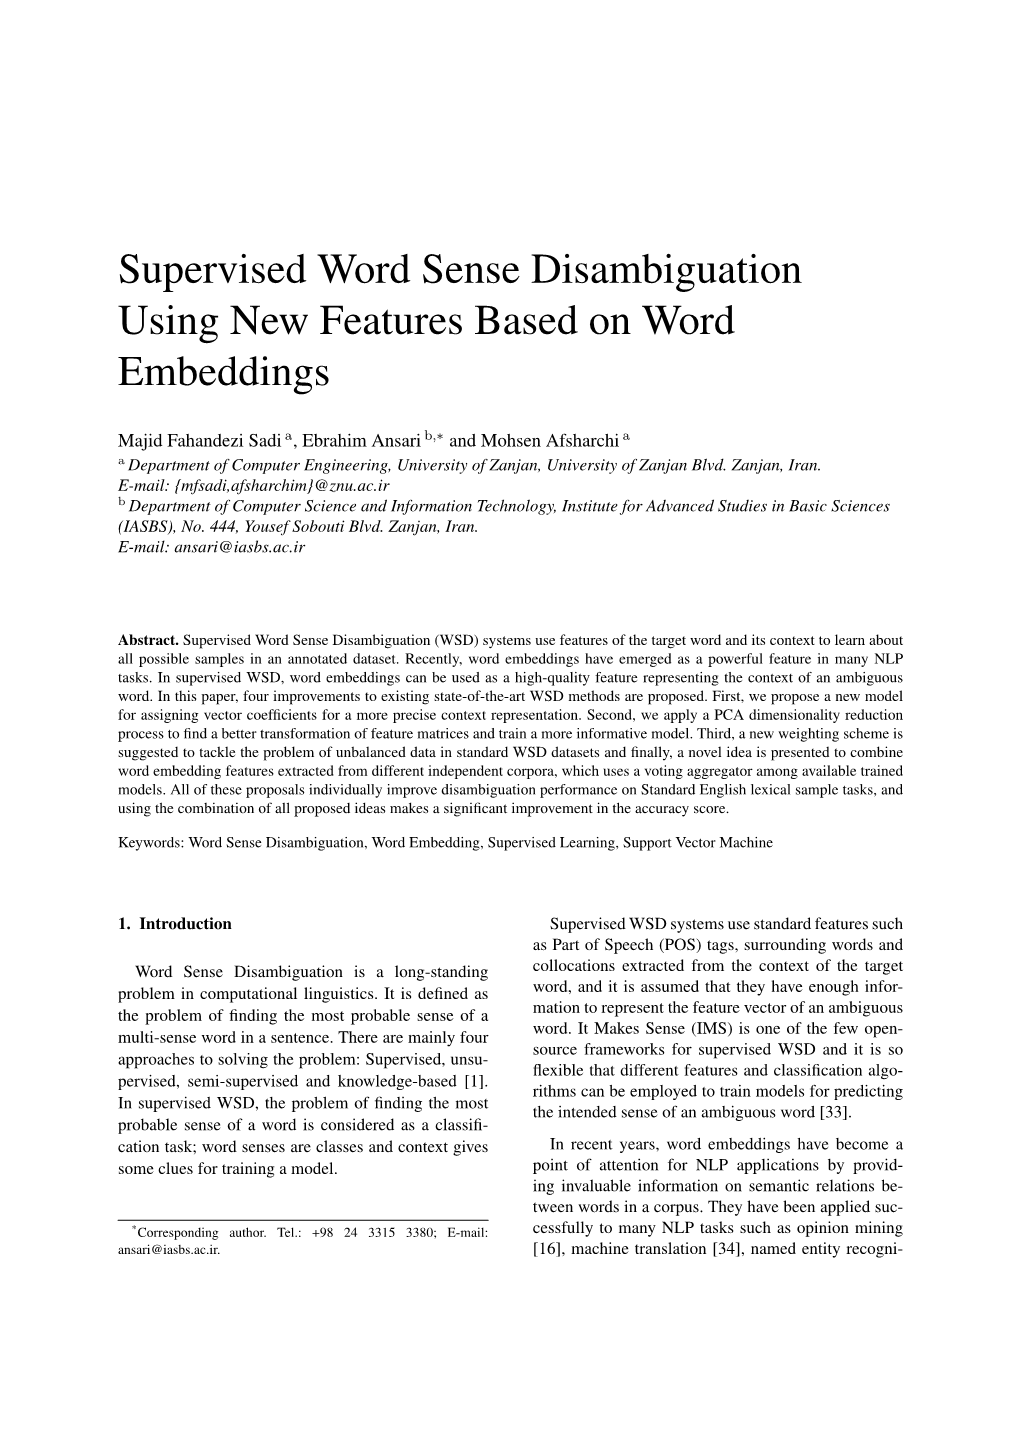 Supervised Word Sense Disambiguation Using New Features Based on Word Embeddings